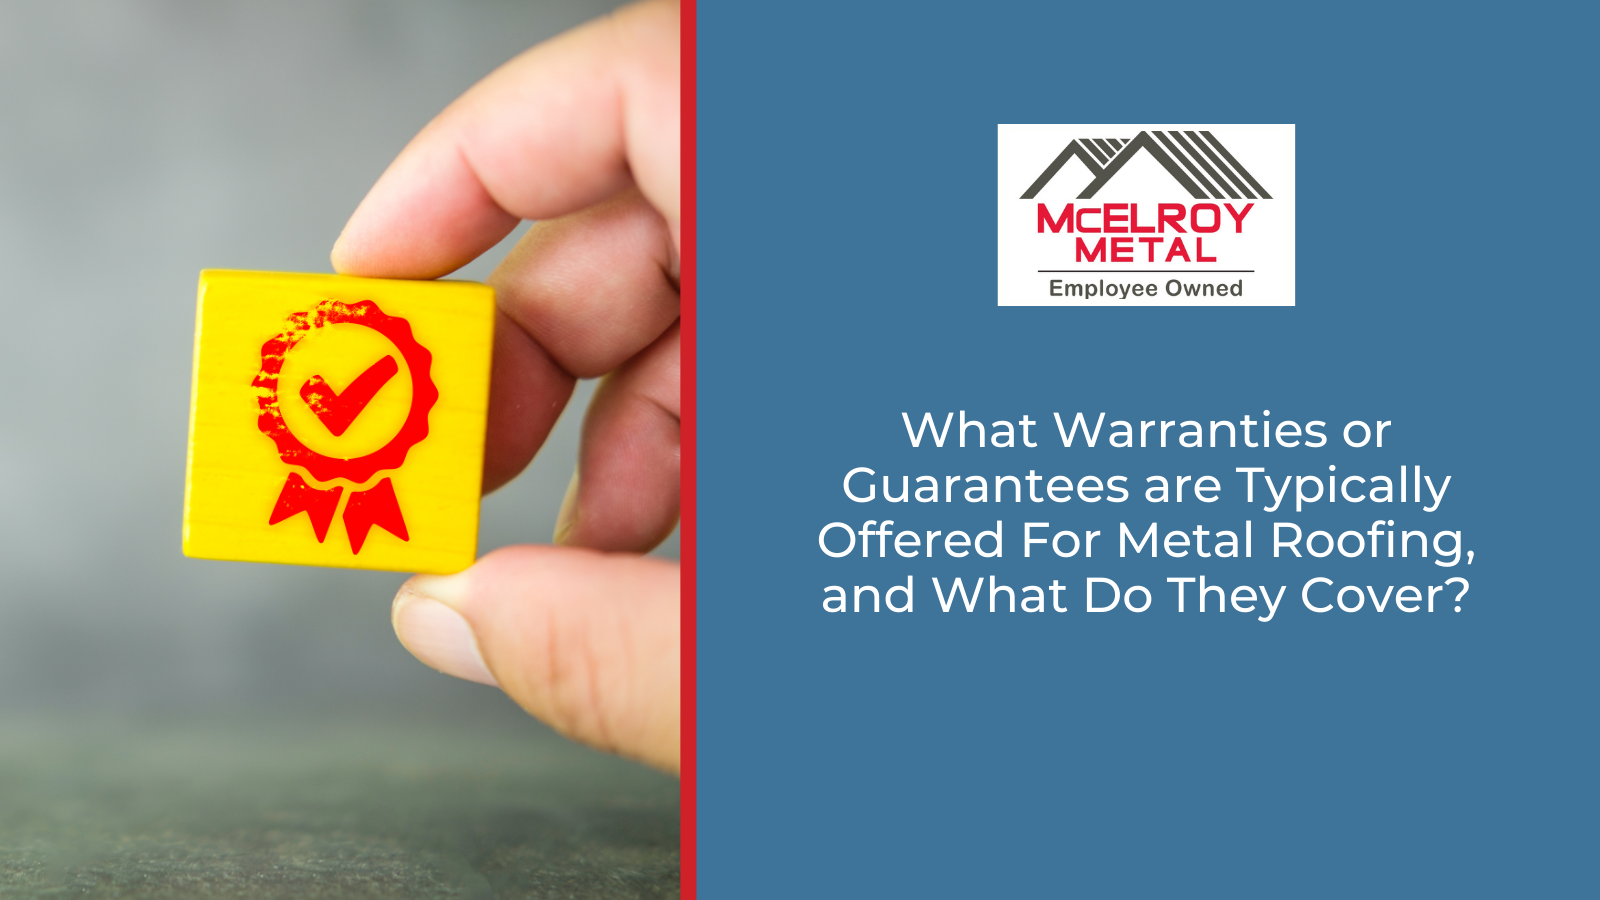 What Warranties or Guarantees are Typically Offered For Metal Roofing, and What Do They Cover?